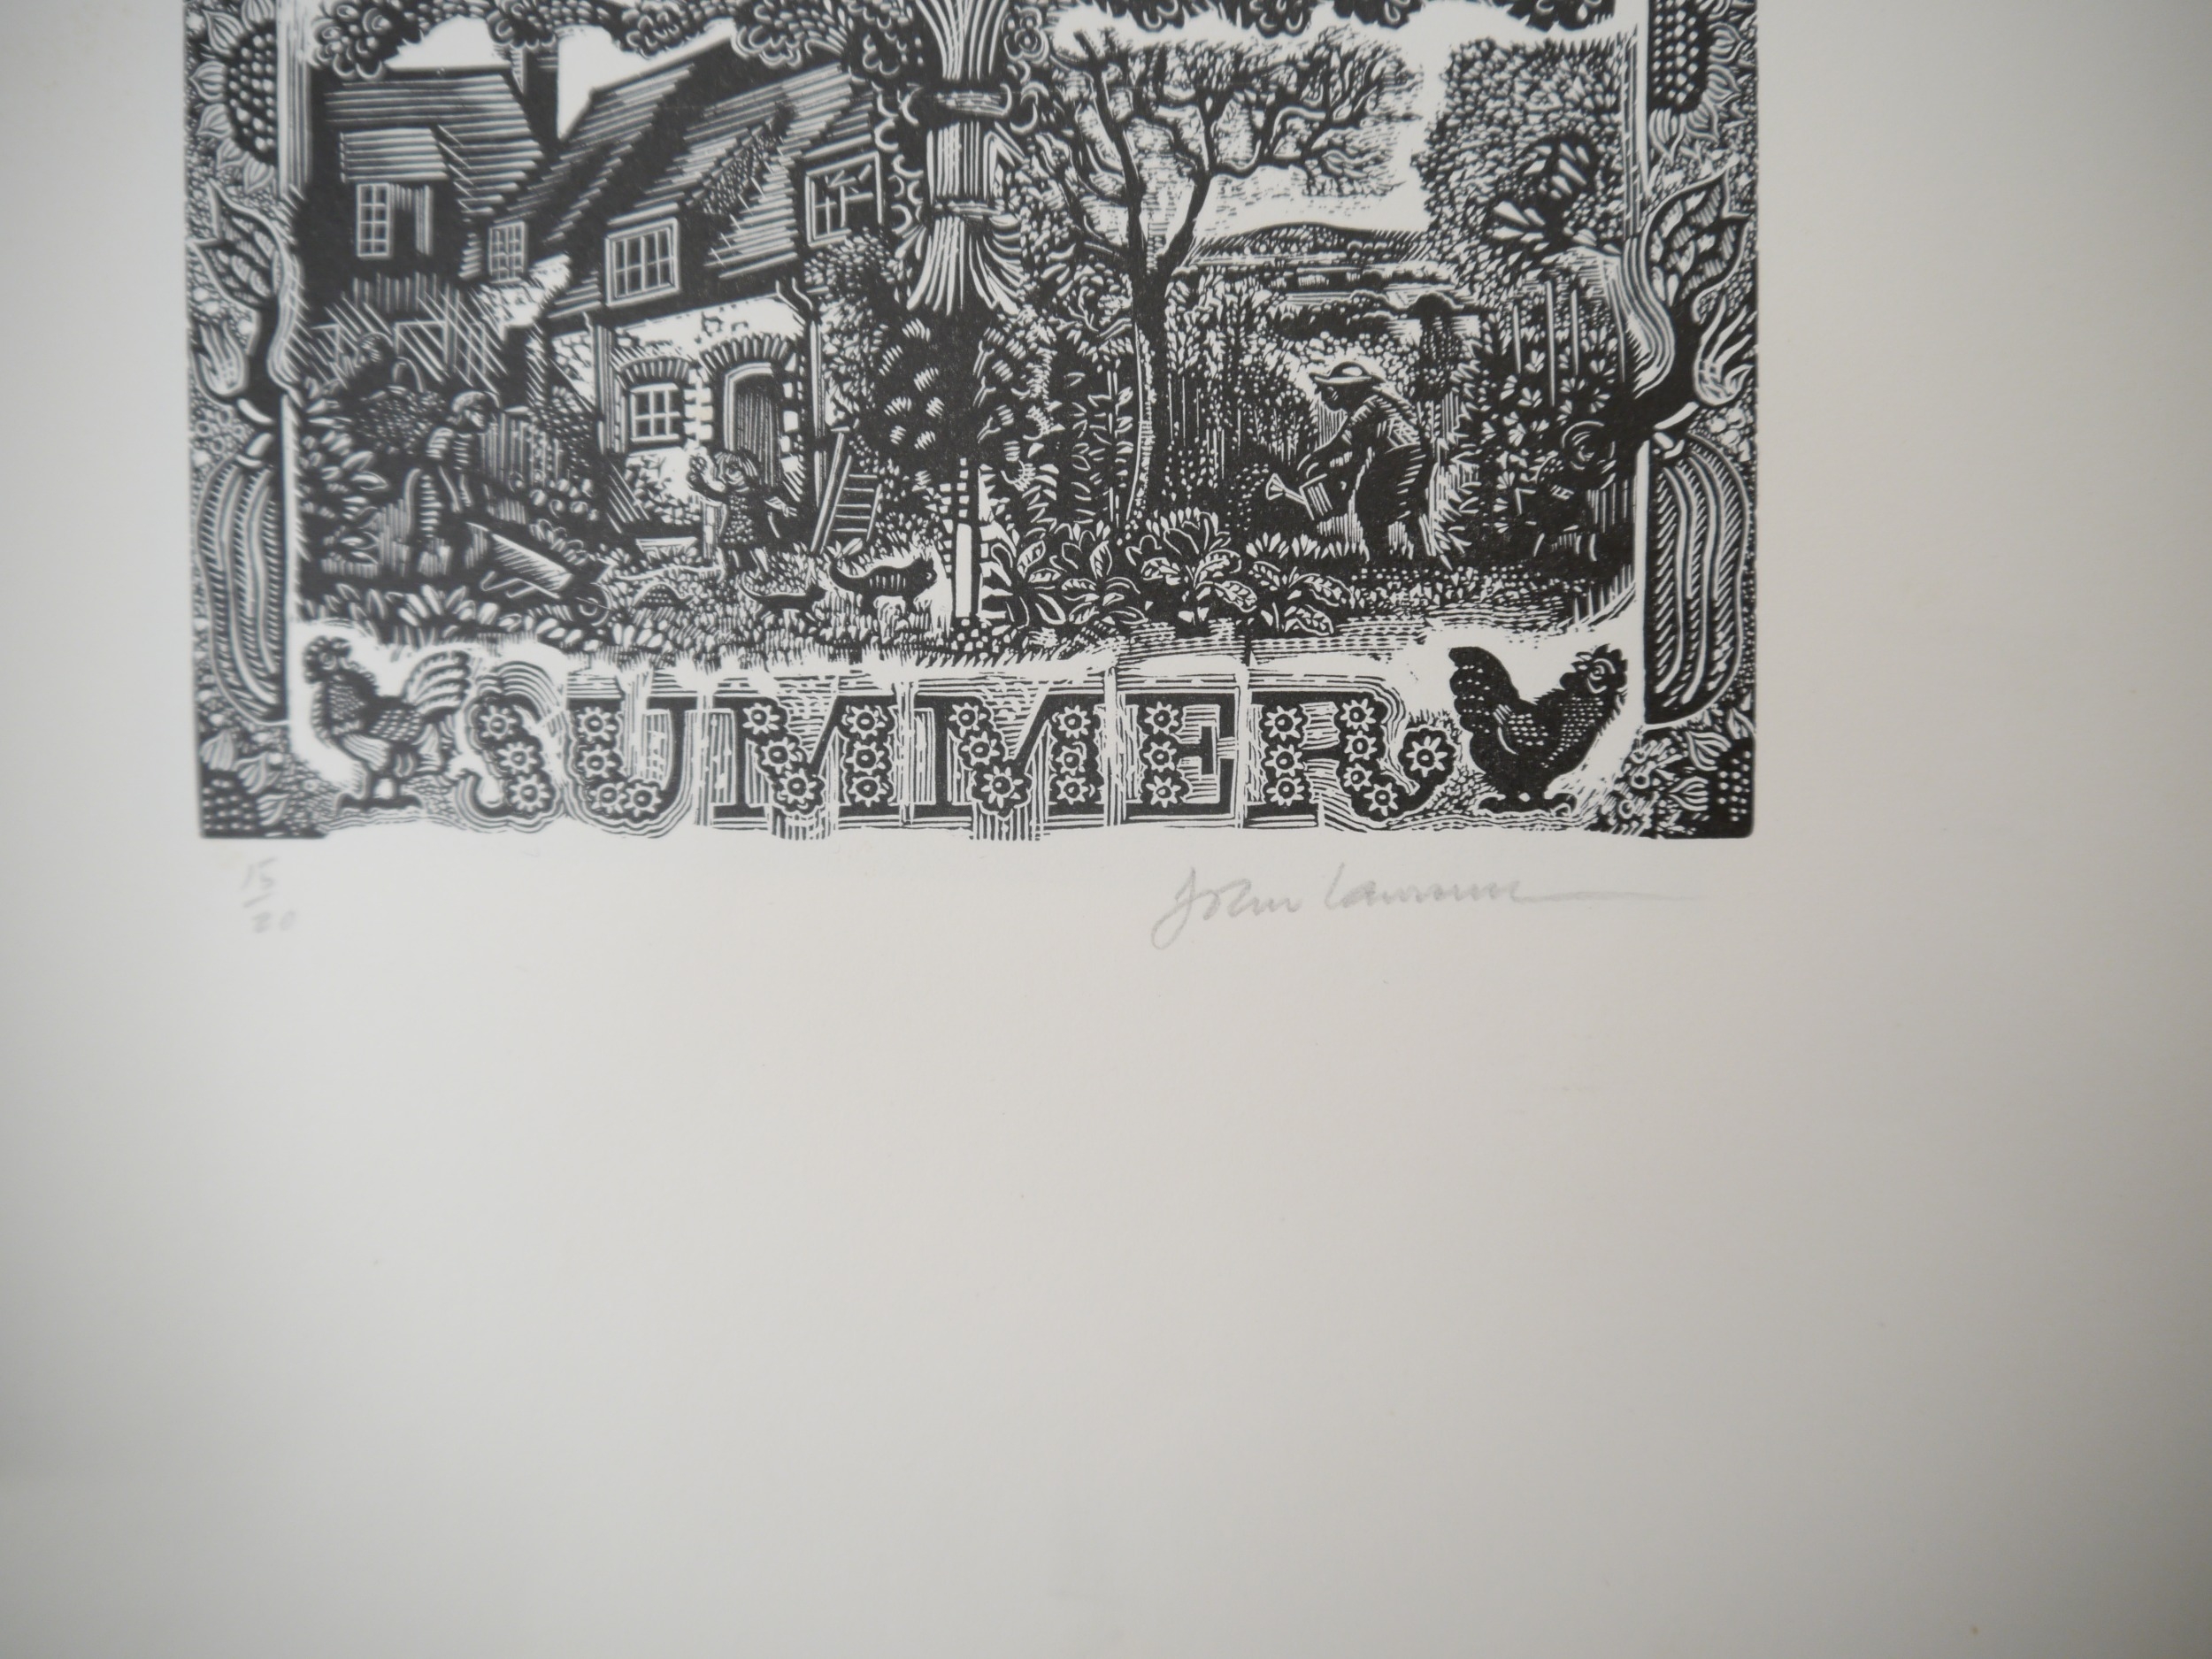 John Lawrence: 'A Selection of Wood Engravings', London, The Camberwell Press, 1986, limited edition - Image 7 of 7